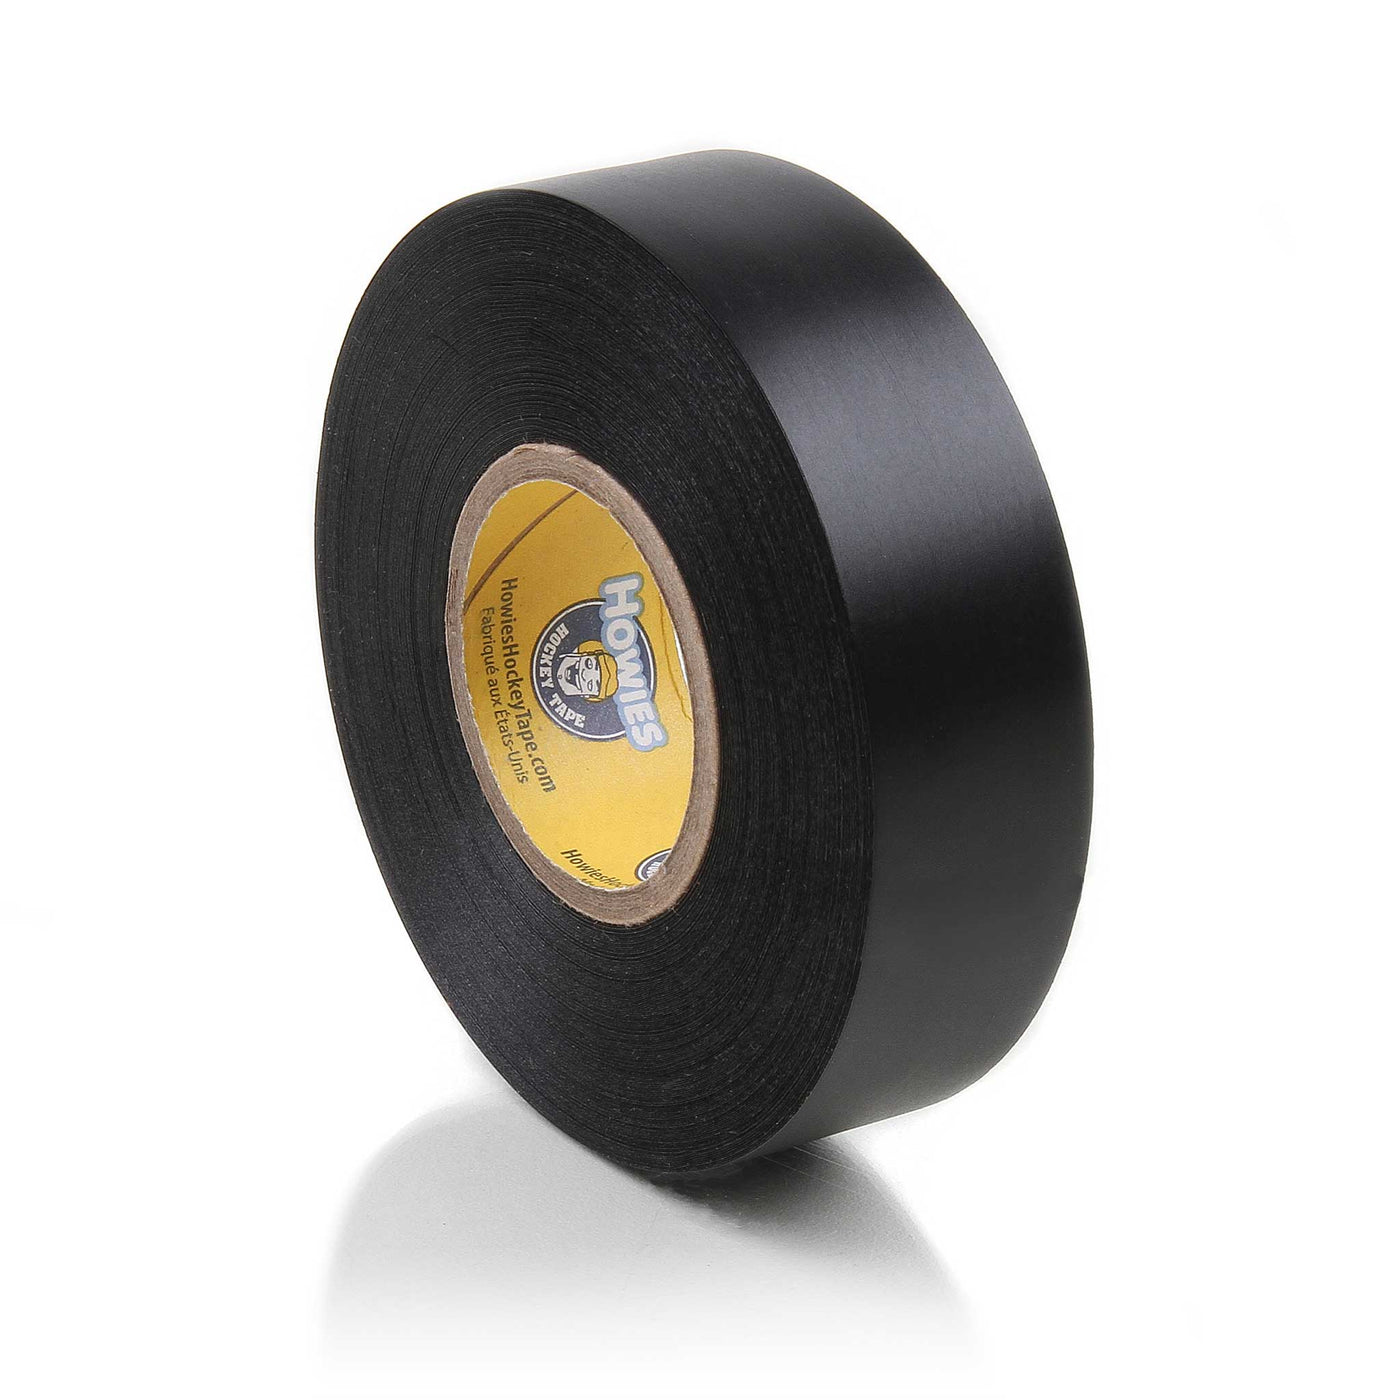 Howies Leg Protection Tape - Black